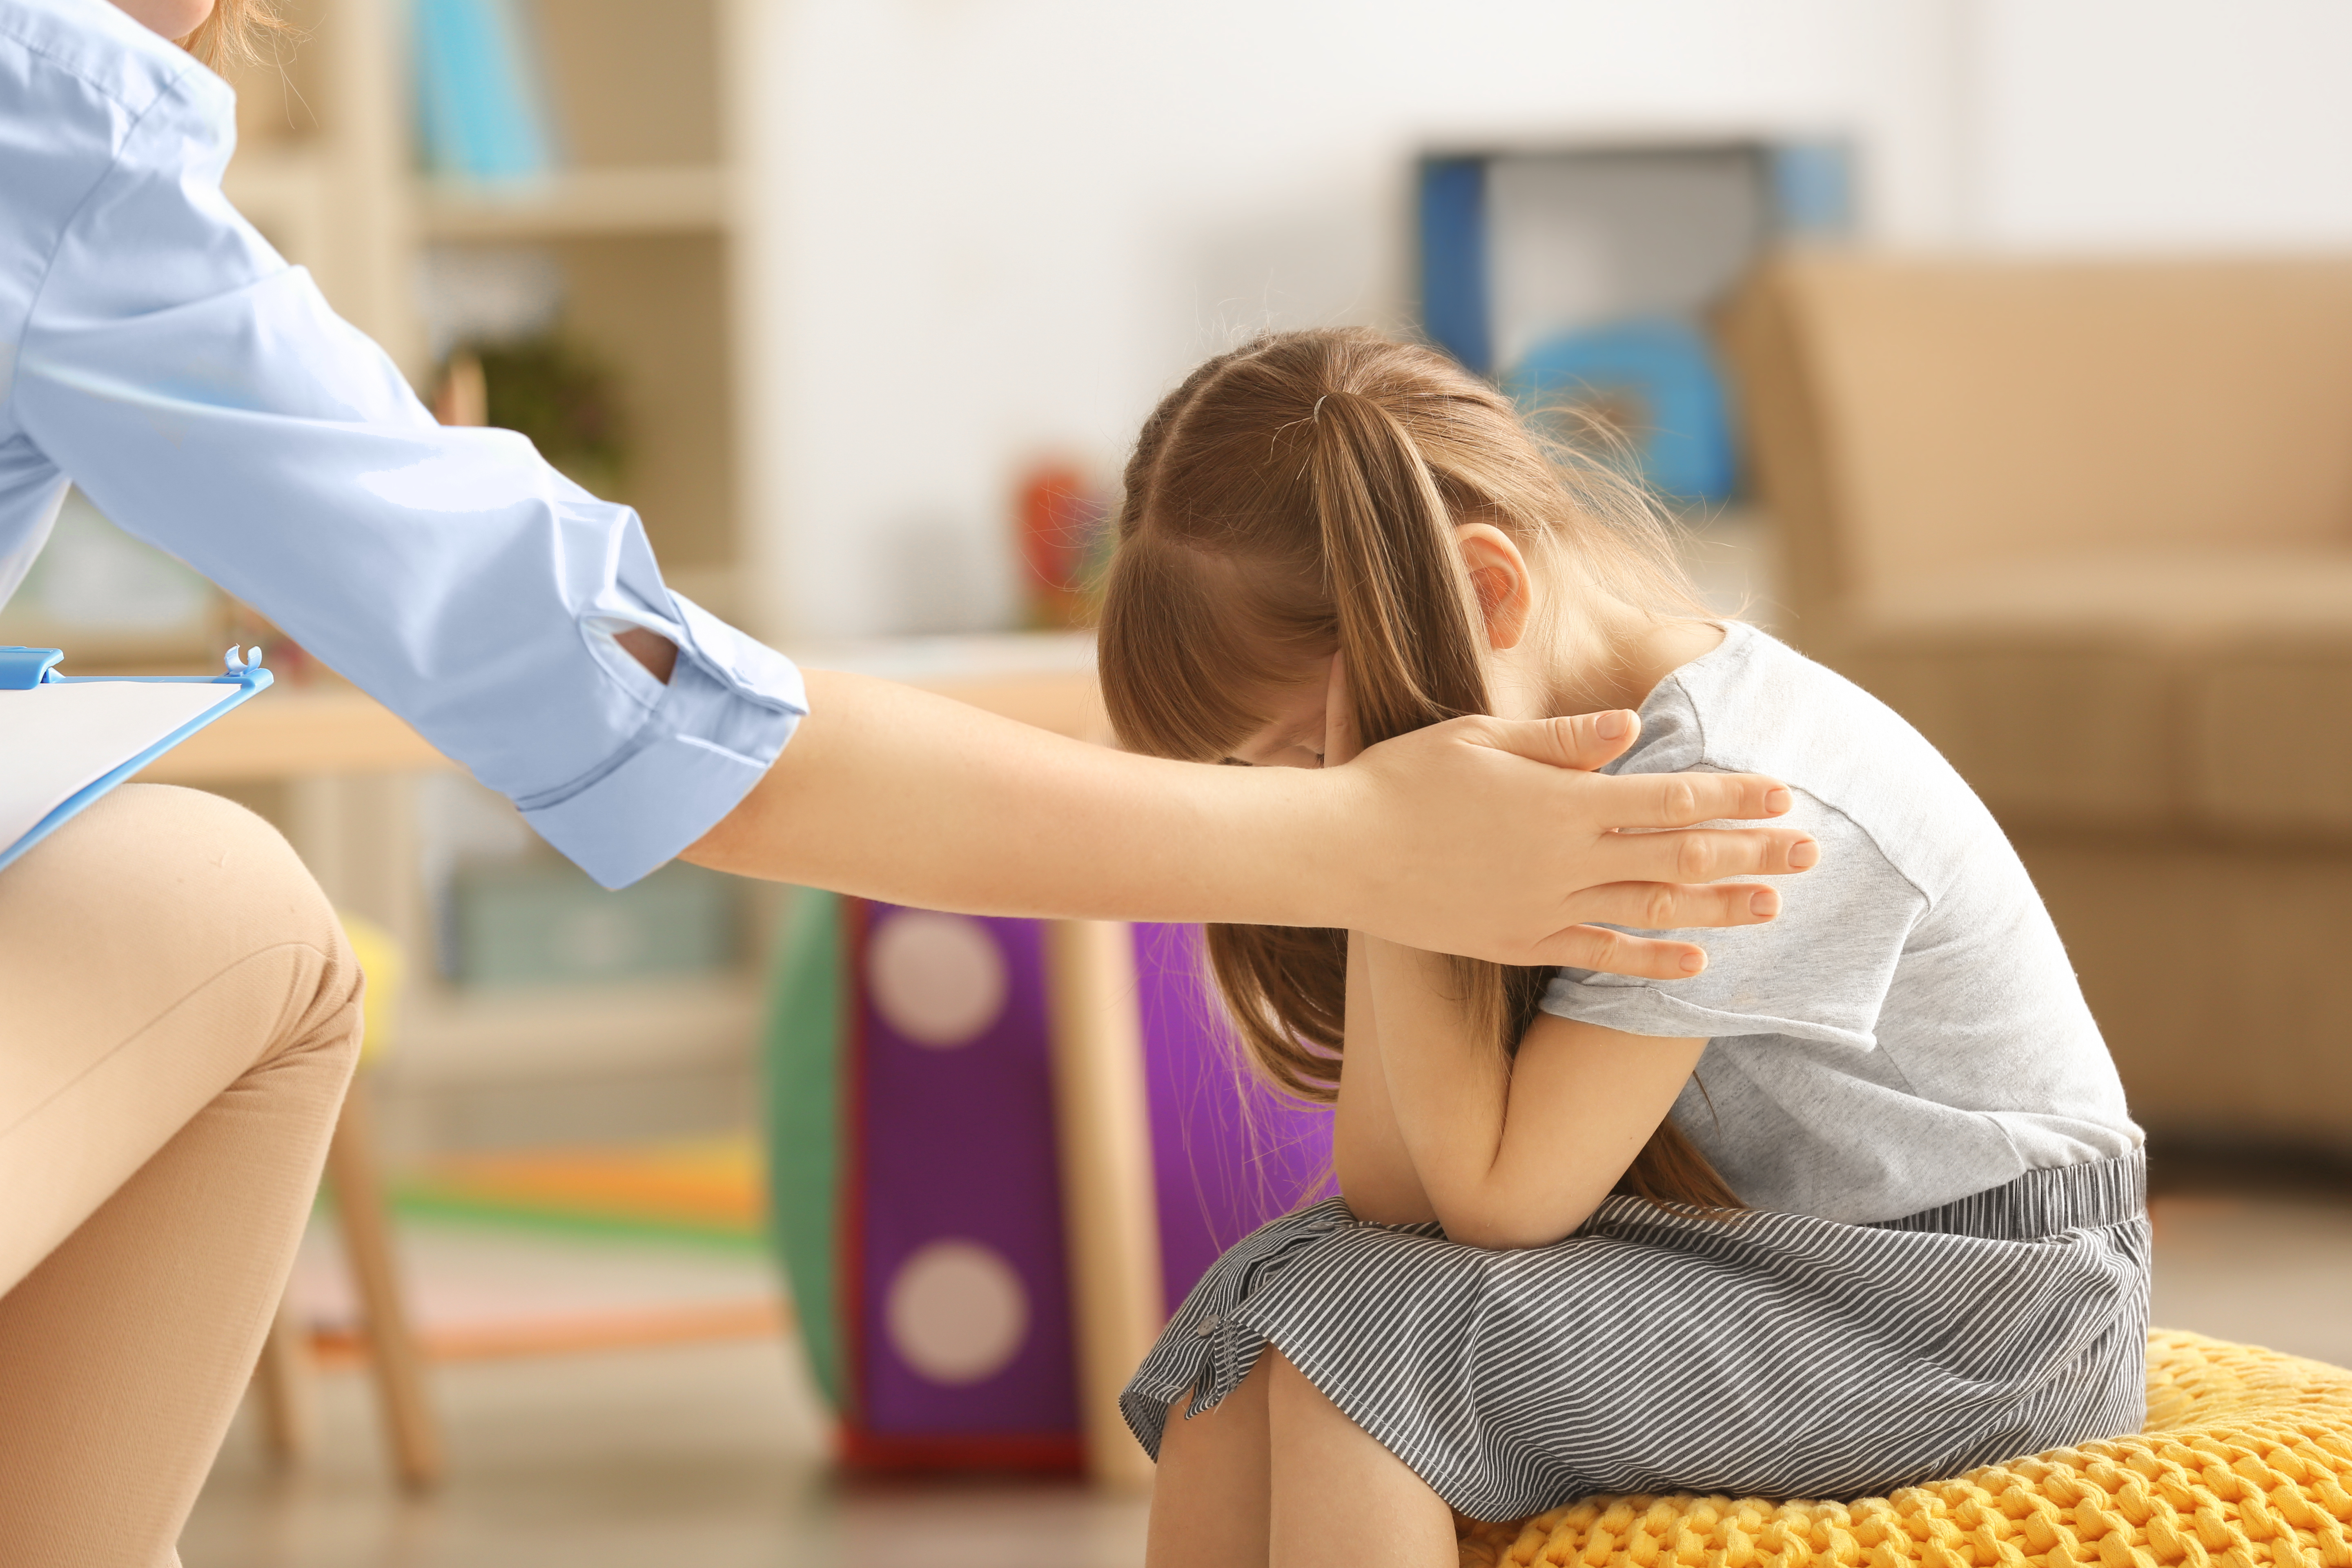 A therapist soothes a young girl who is exhibiting a problem behavior